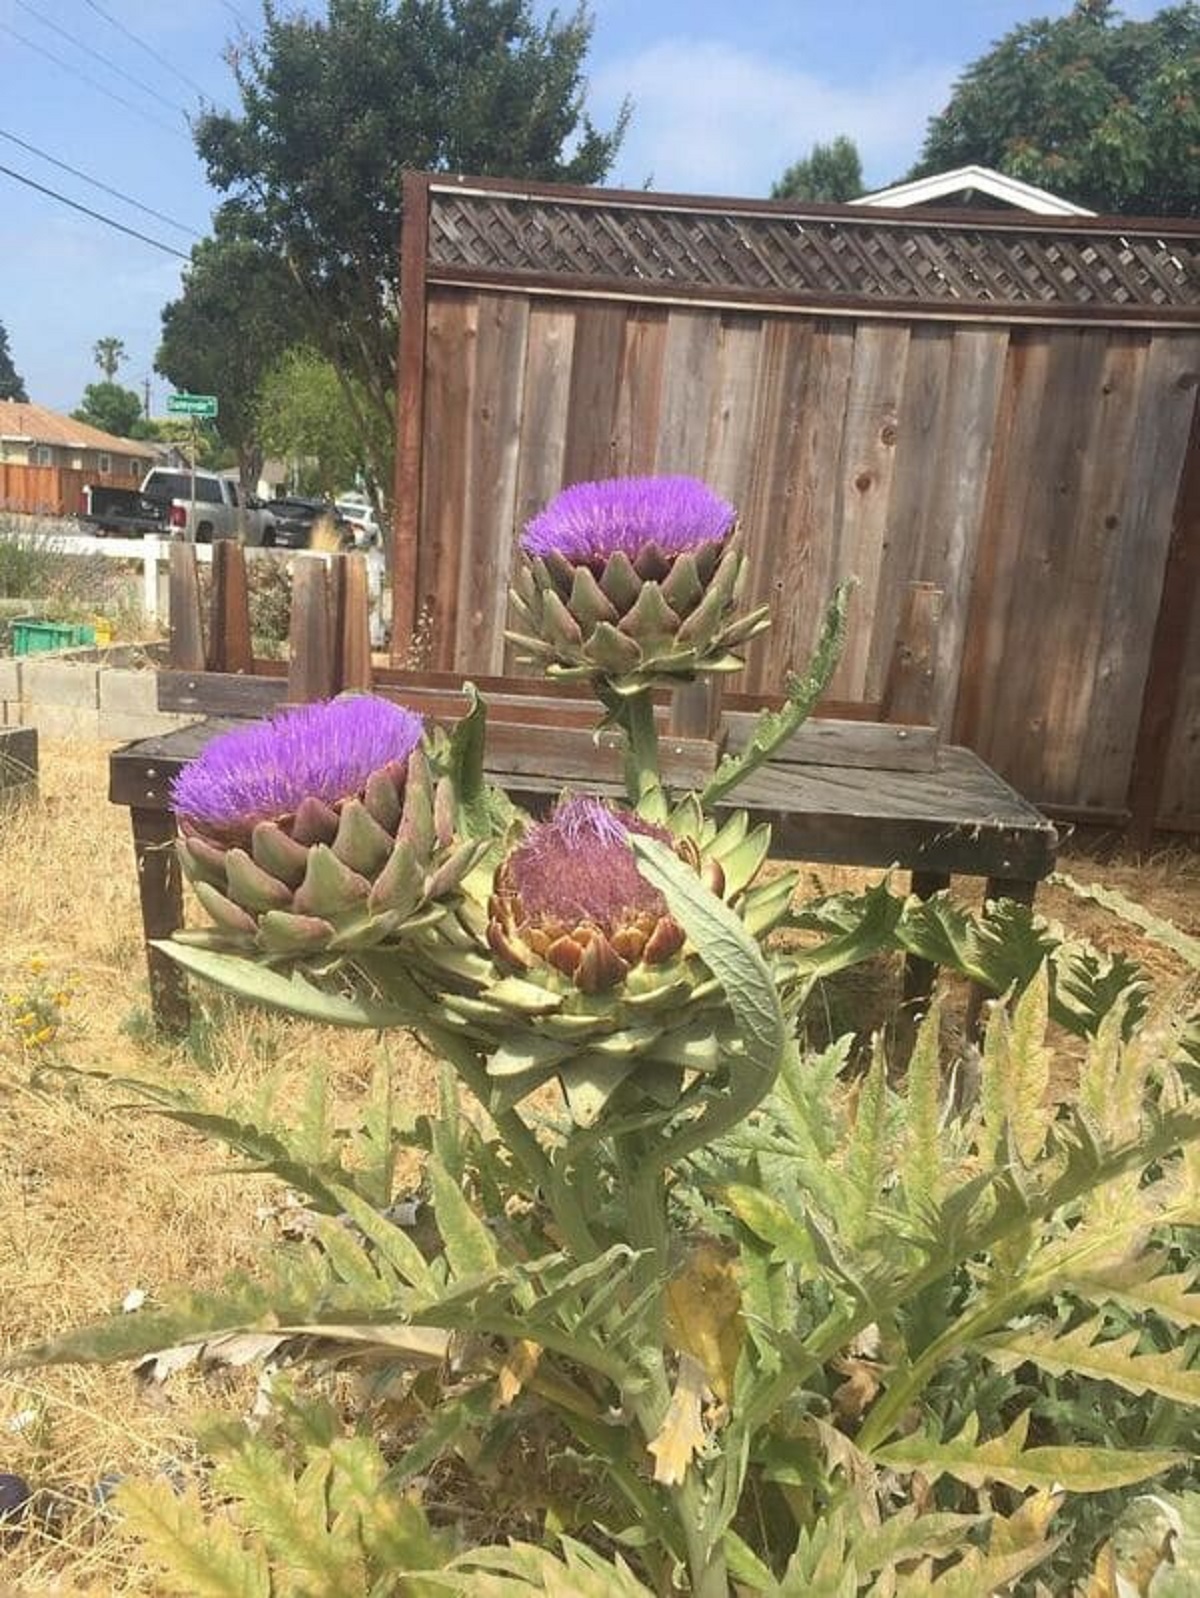 “Artichokes Are Flowers, Here Is What They Look Like If Not Harvested For Consumption”